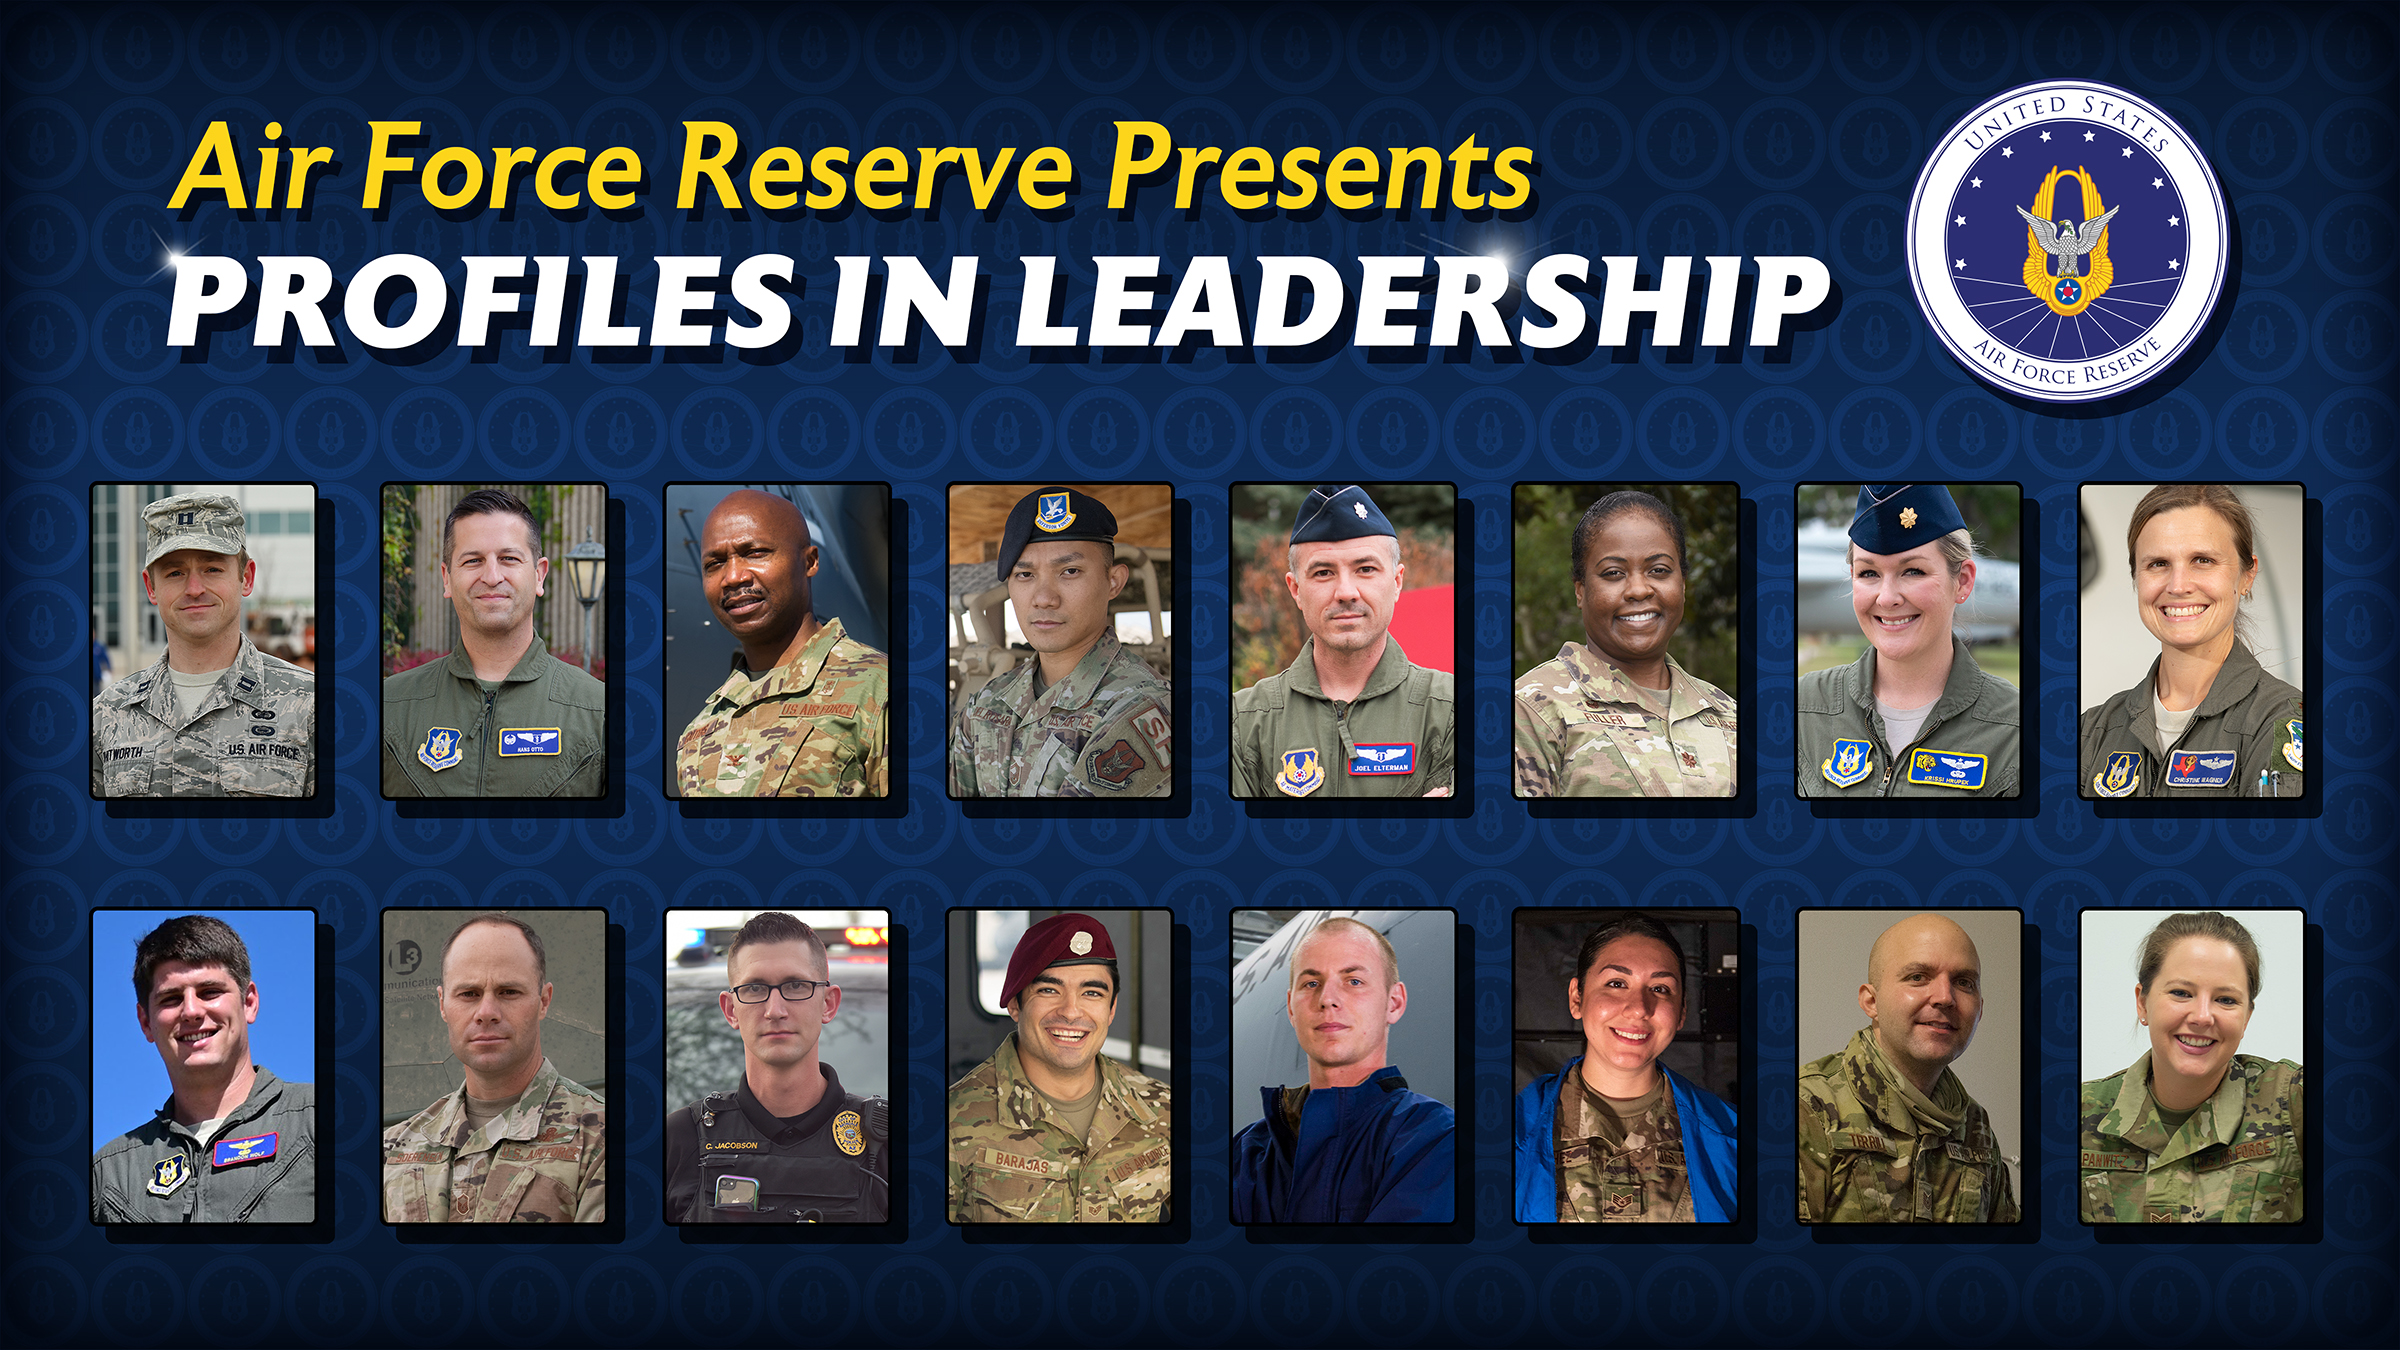 Air Force Reserve Command Profiles in Leadership Volume 6 main image. Click on individual images for names and full poster. 